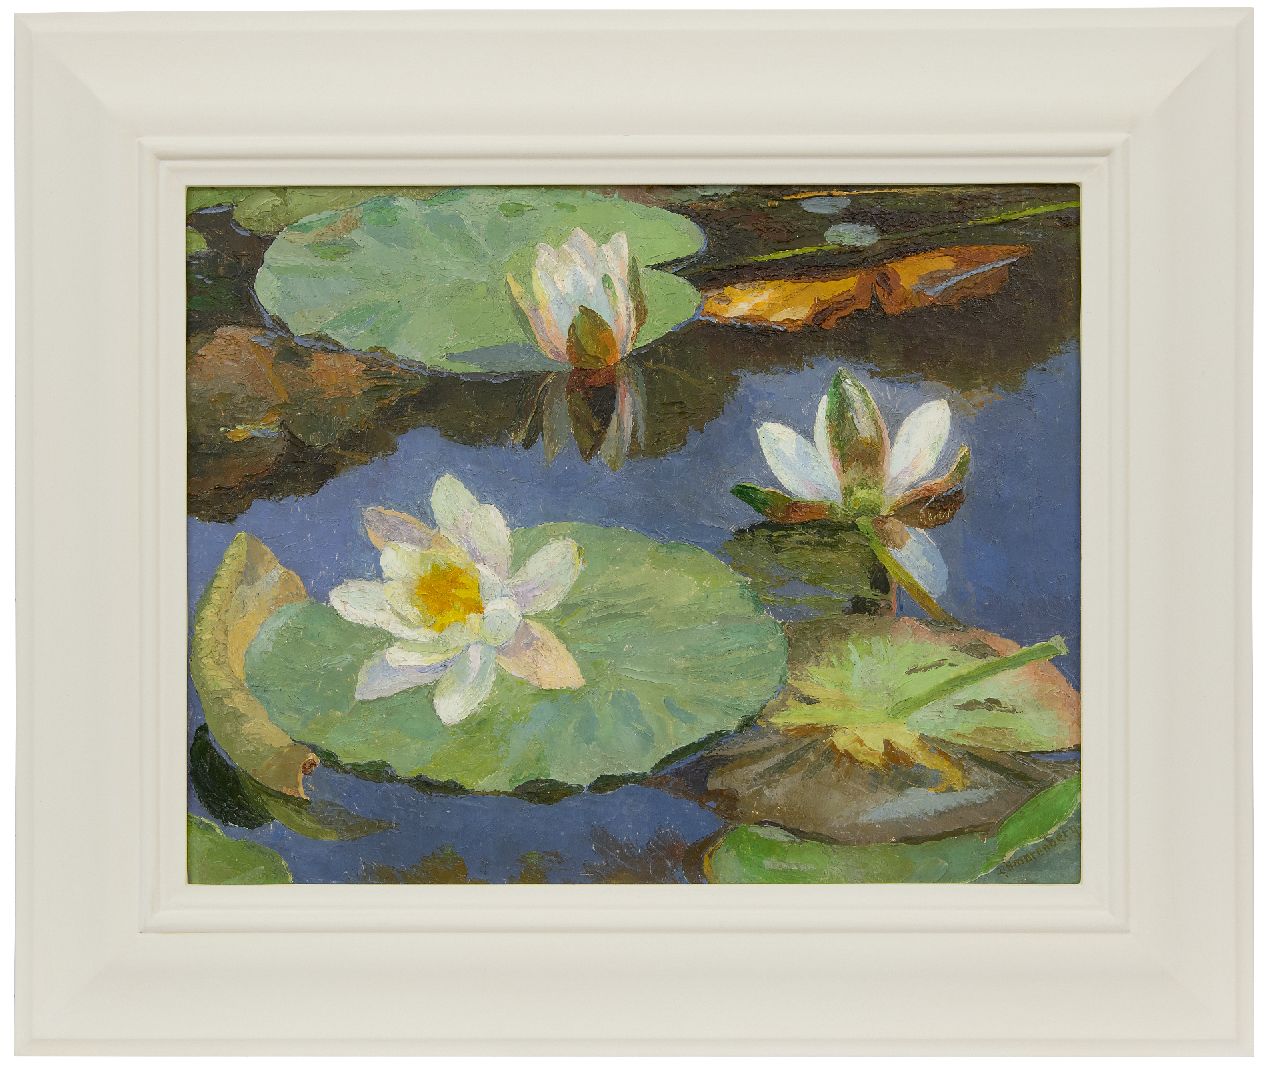 Smorenberg D.  | Dirk Smorenberg | Paintings offered for sale | Waterlilies, oil on canvas 41.2 x 53.3 cm, signed l.r.